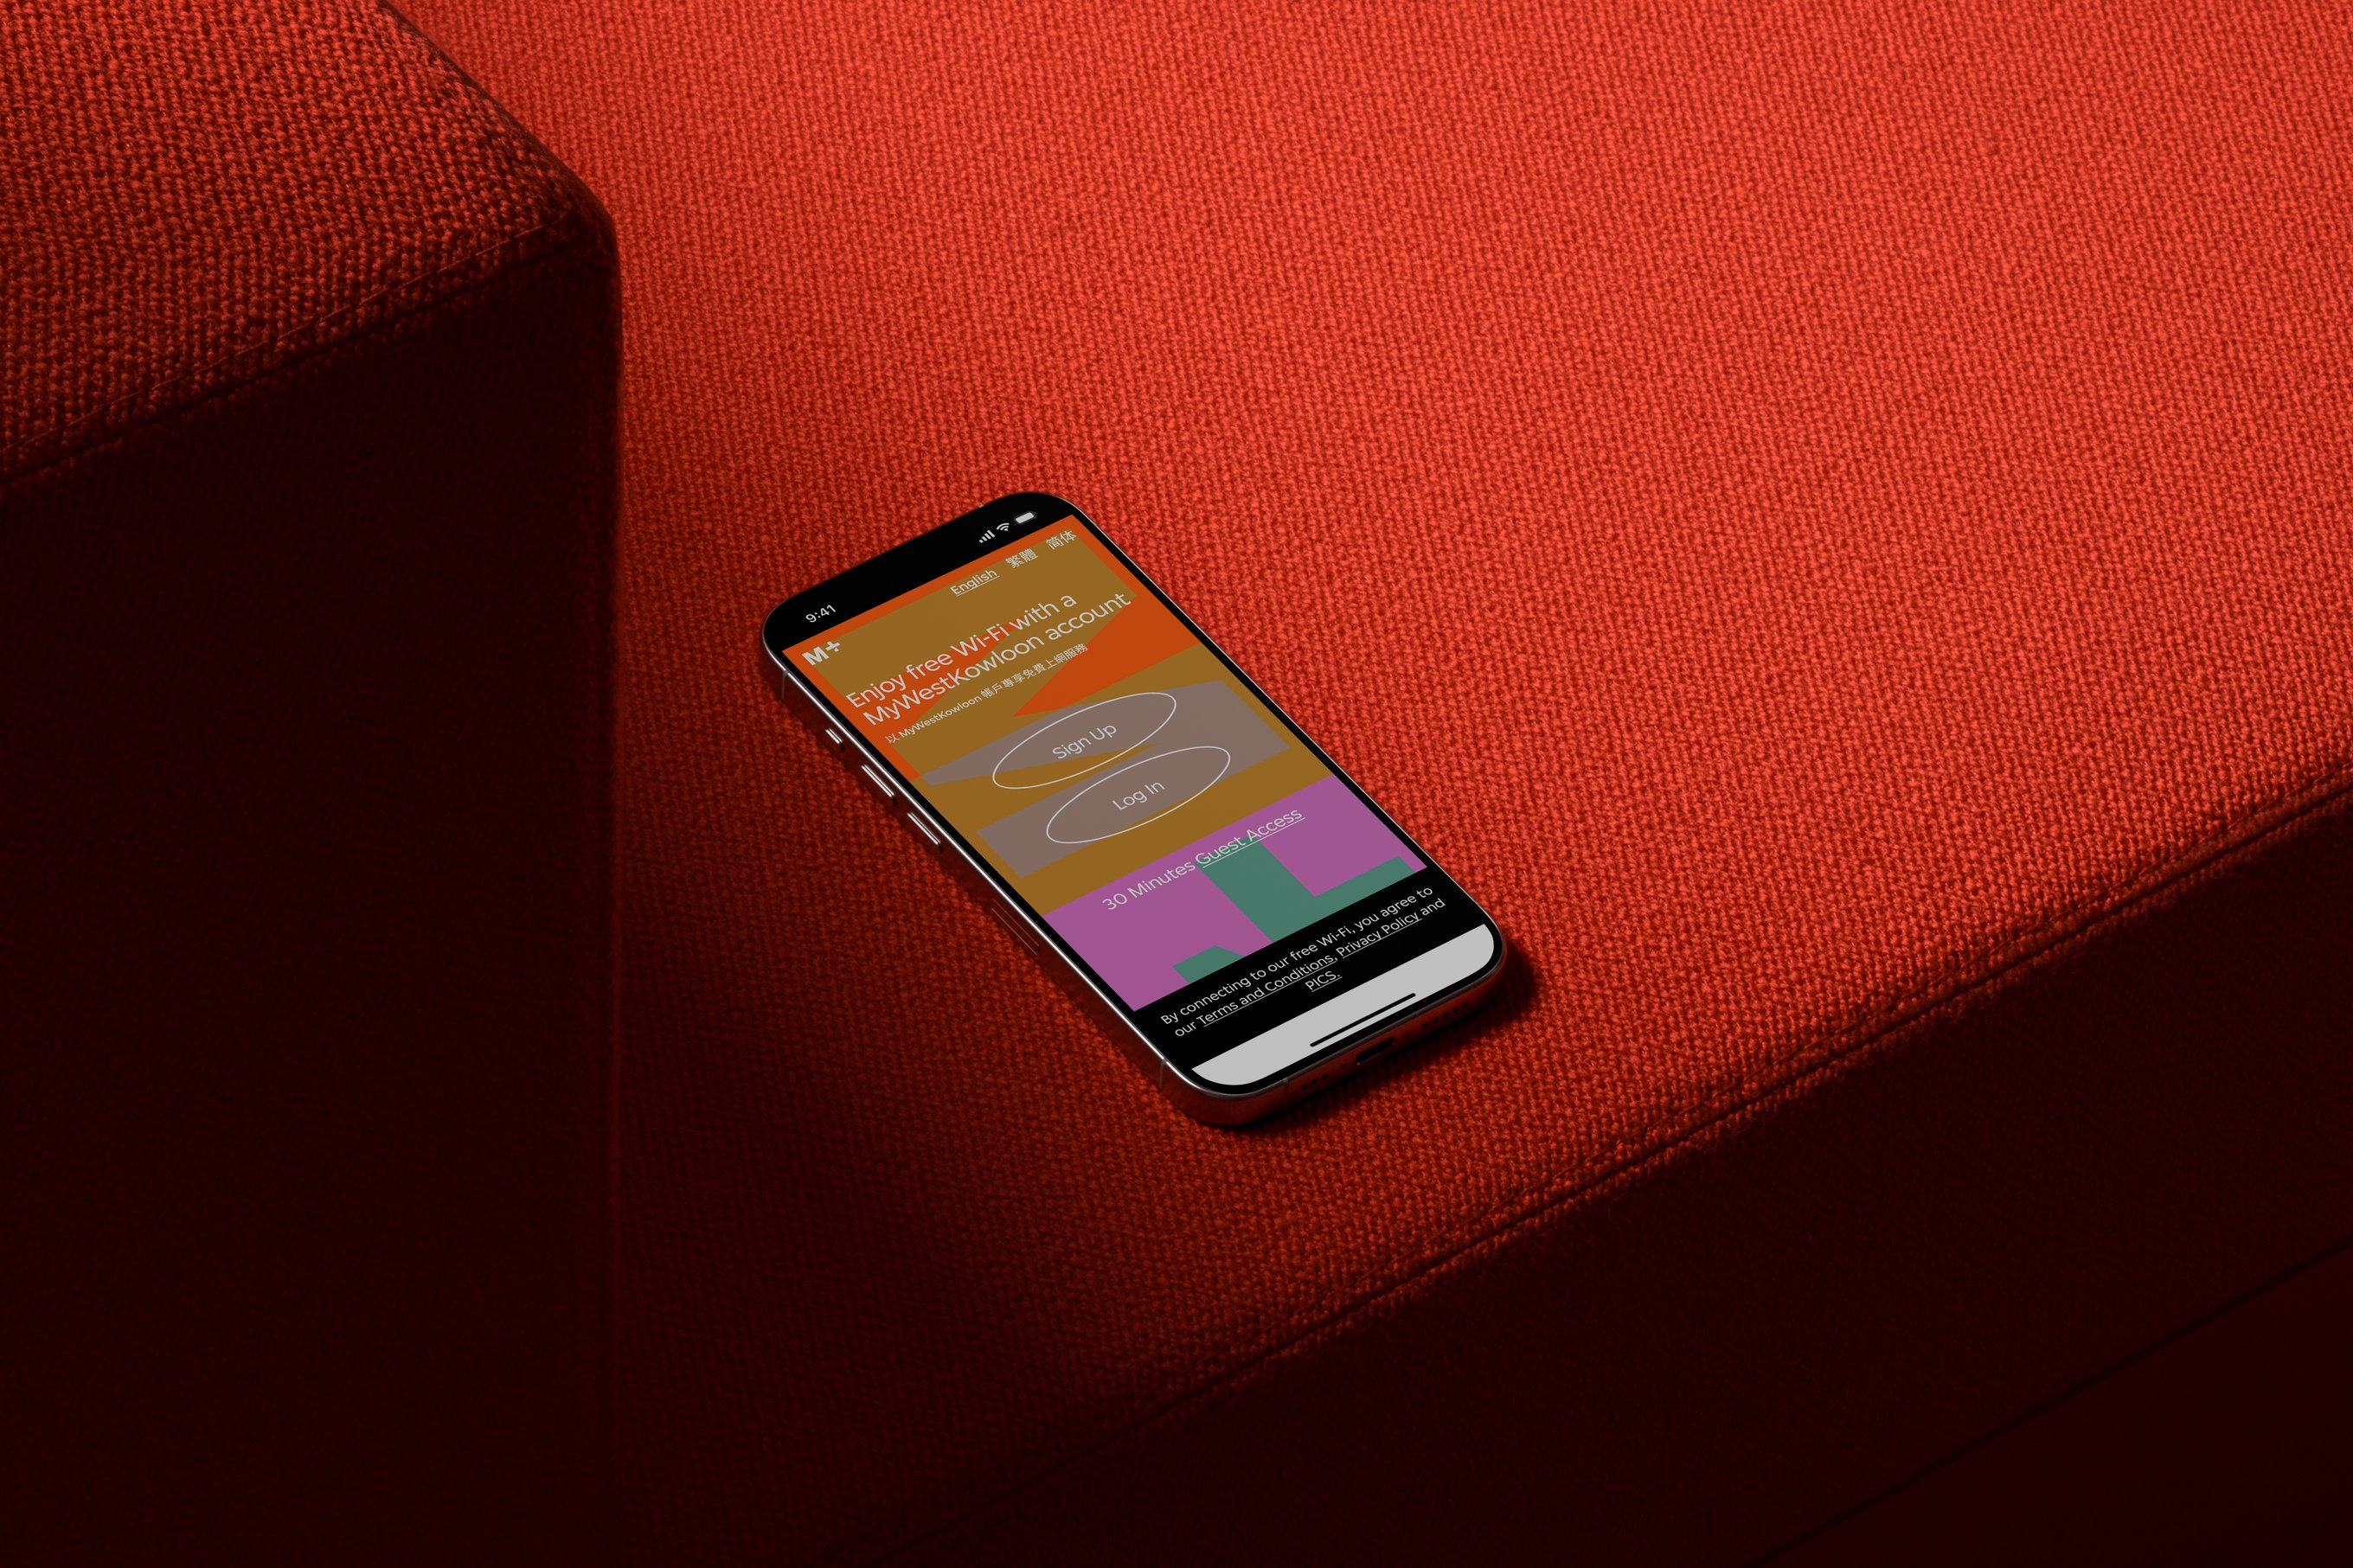 A mock-up of the M+ Wi-Fi interface displayed on an iPhone placed on a sofa.